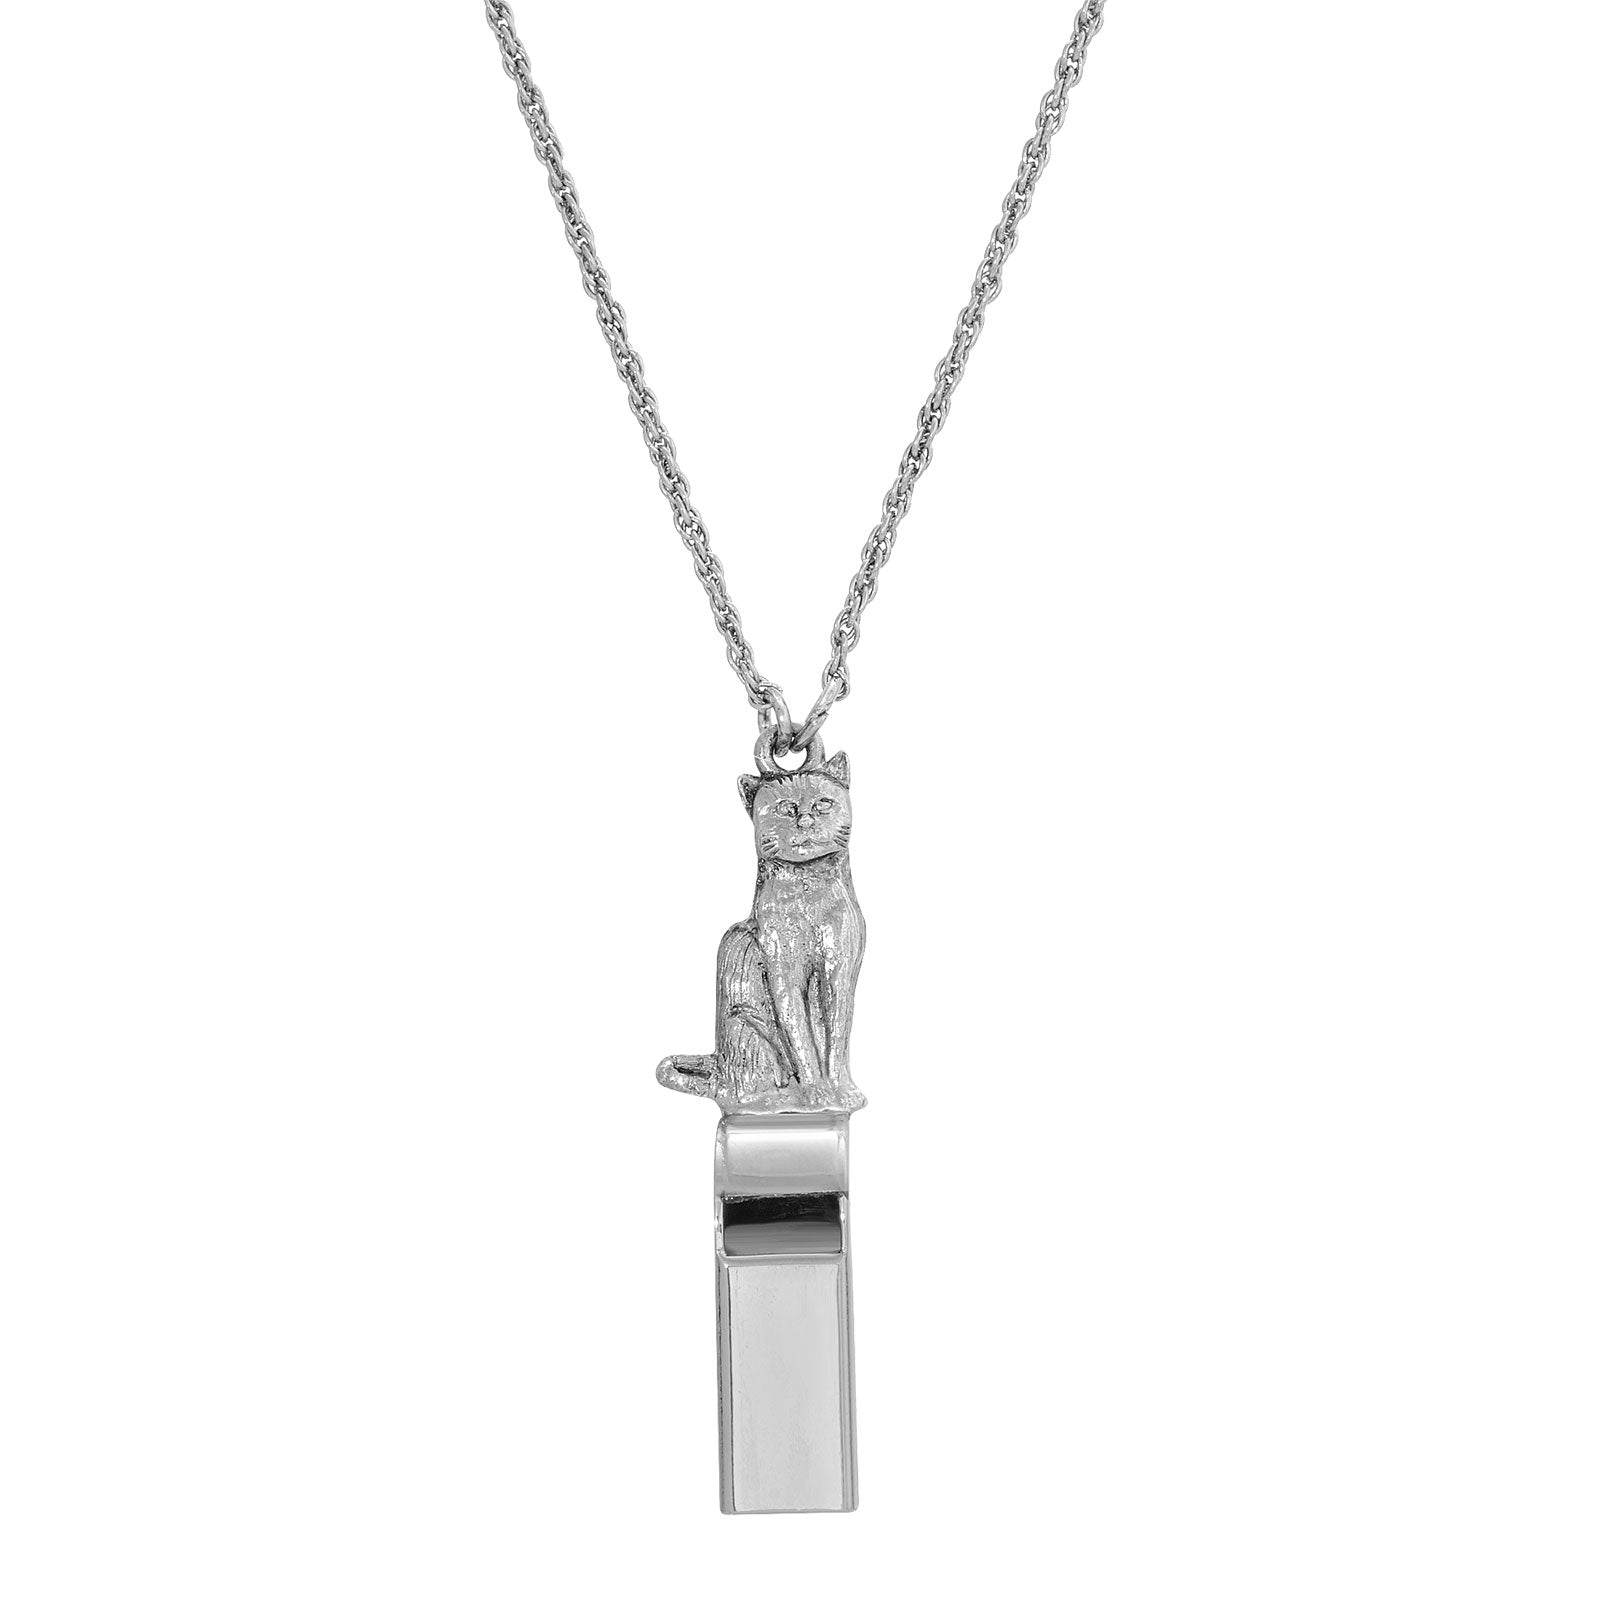 Silver Tone Cat Whistle Necklace 28 In.